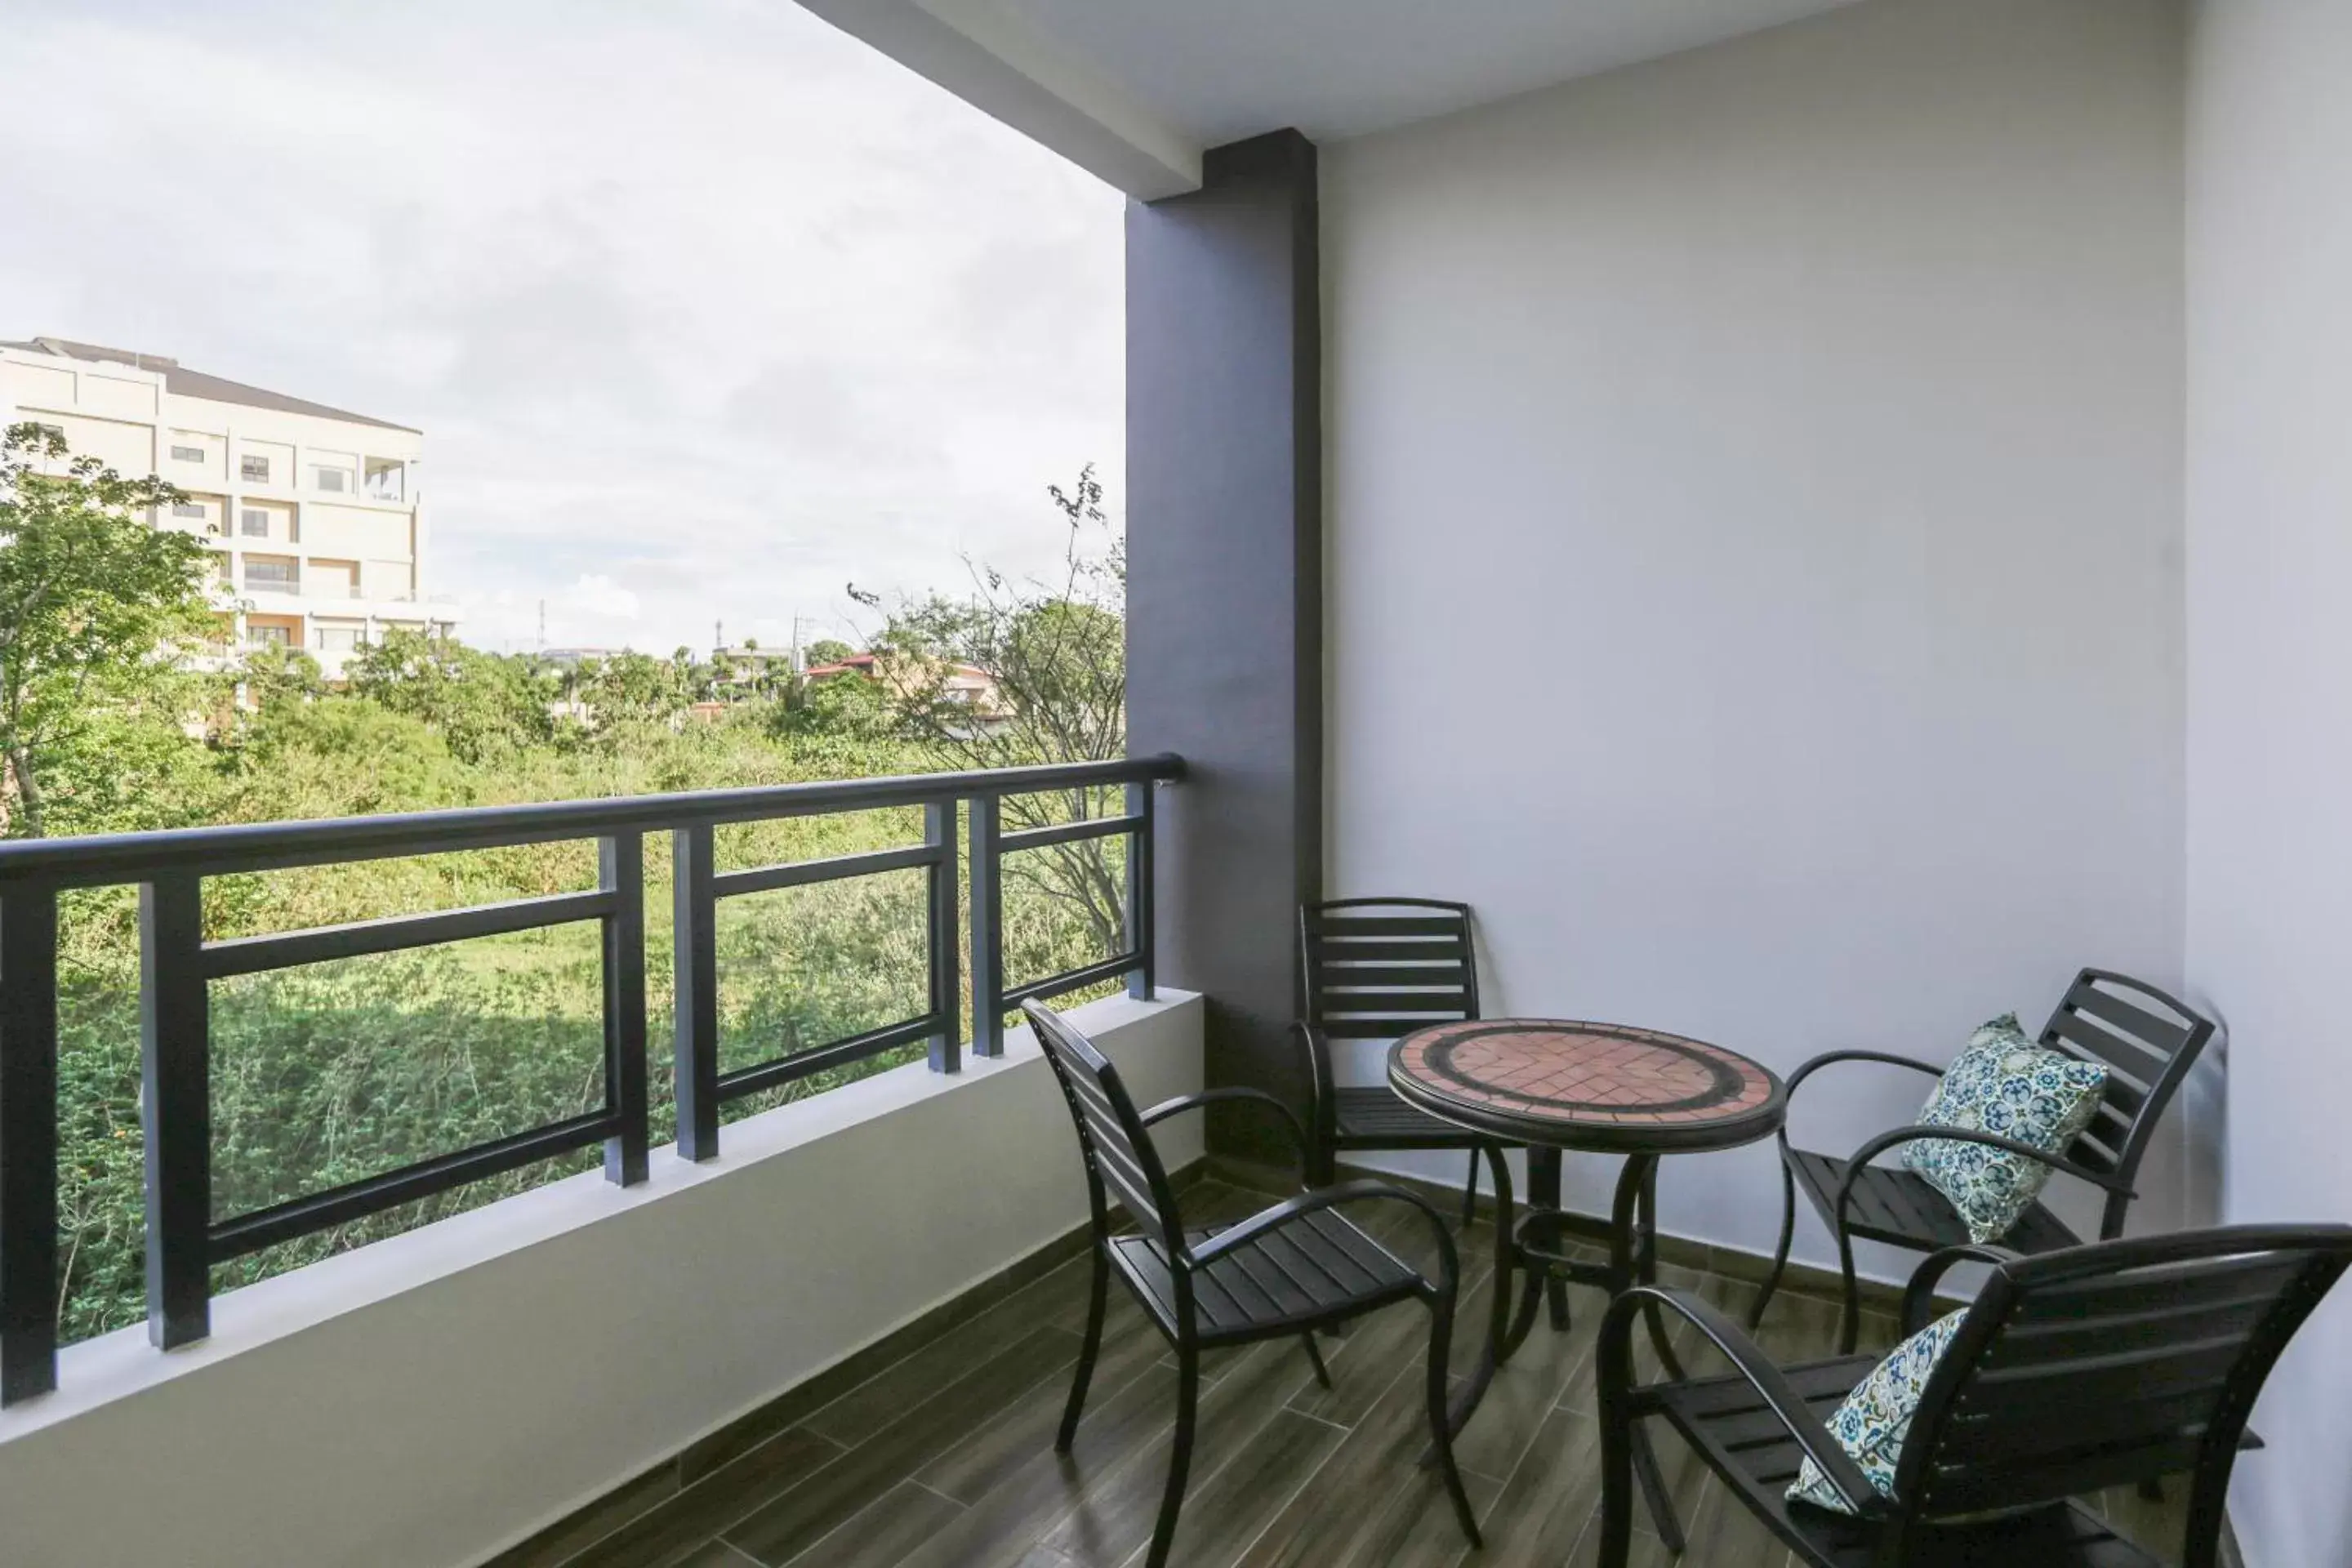 Balcony/Terrace in Hotel Casiana Managed by Enderun Hotels